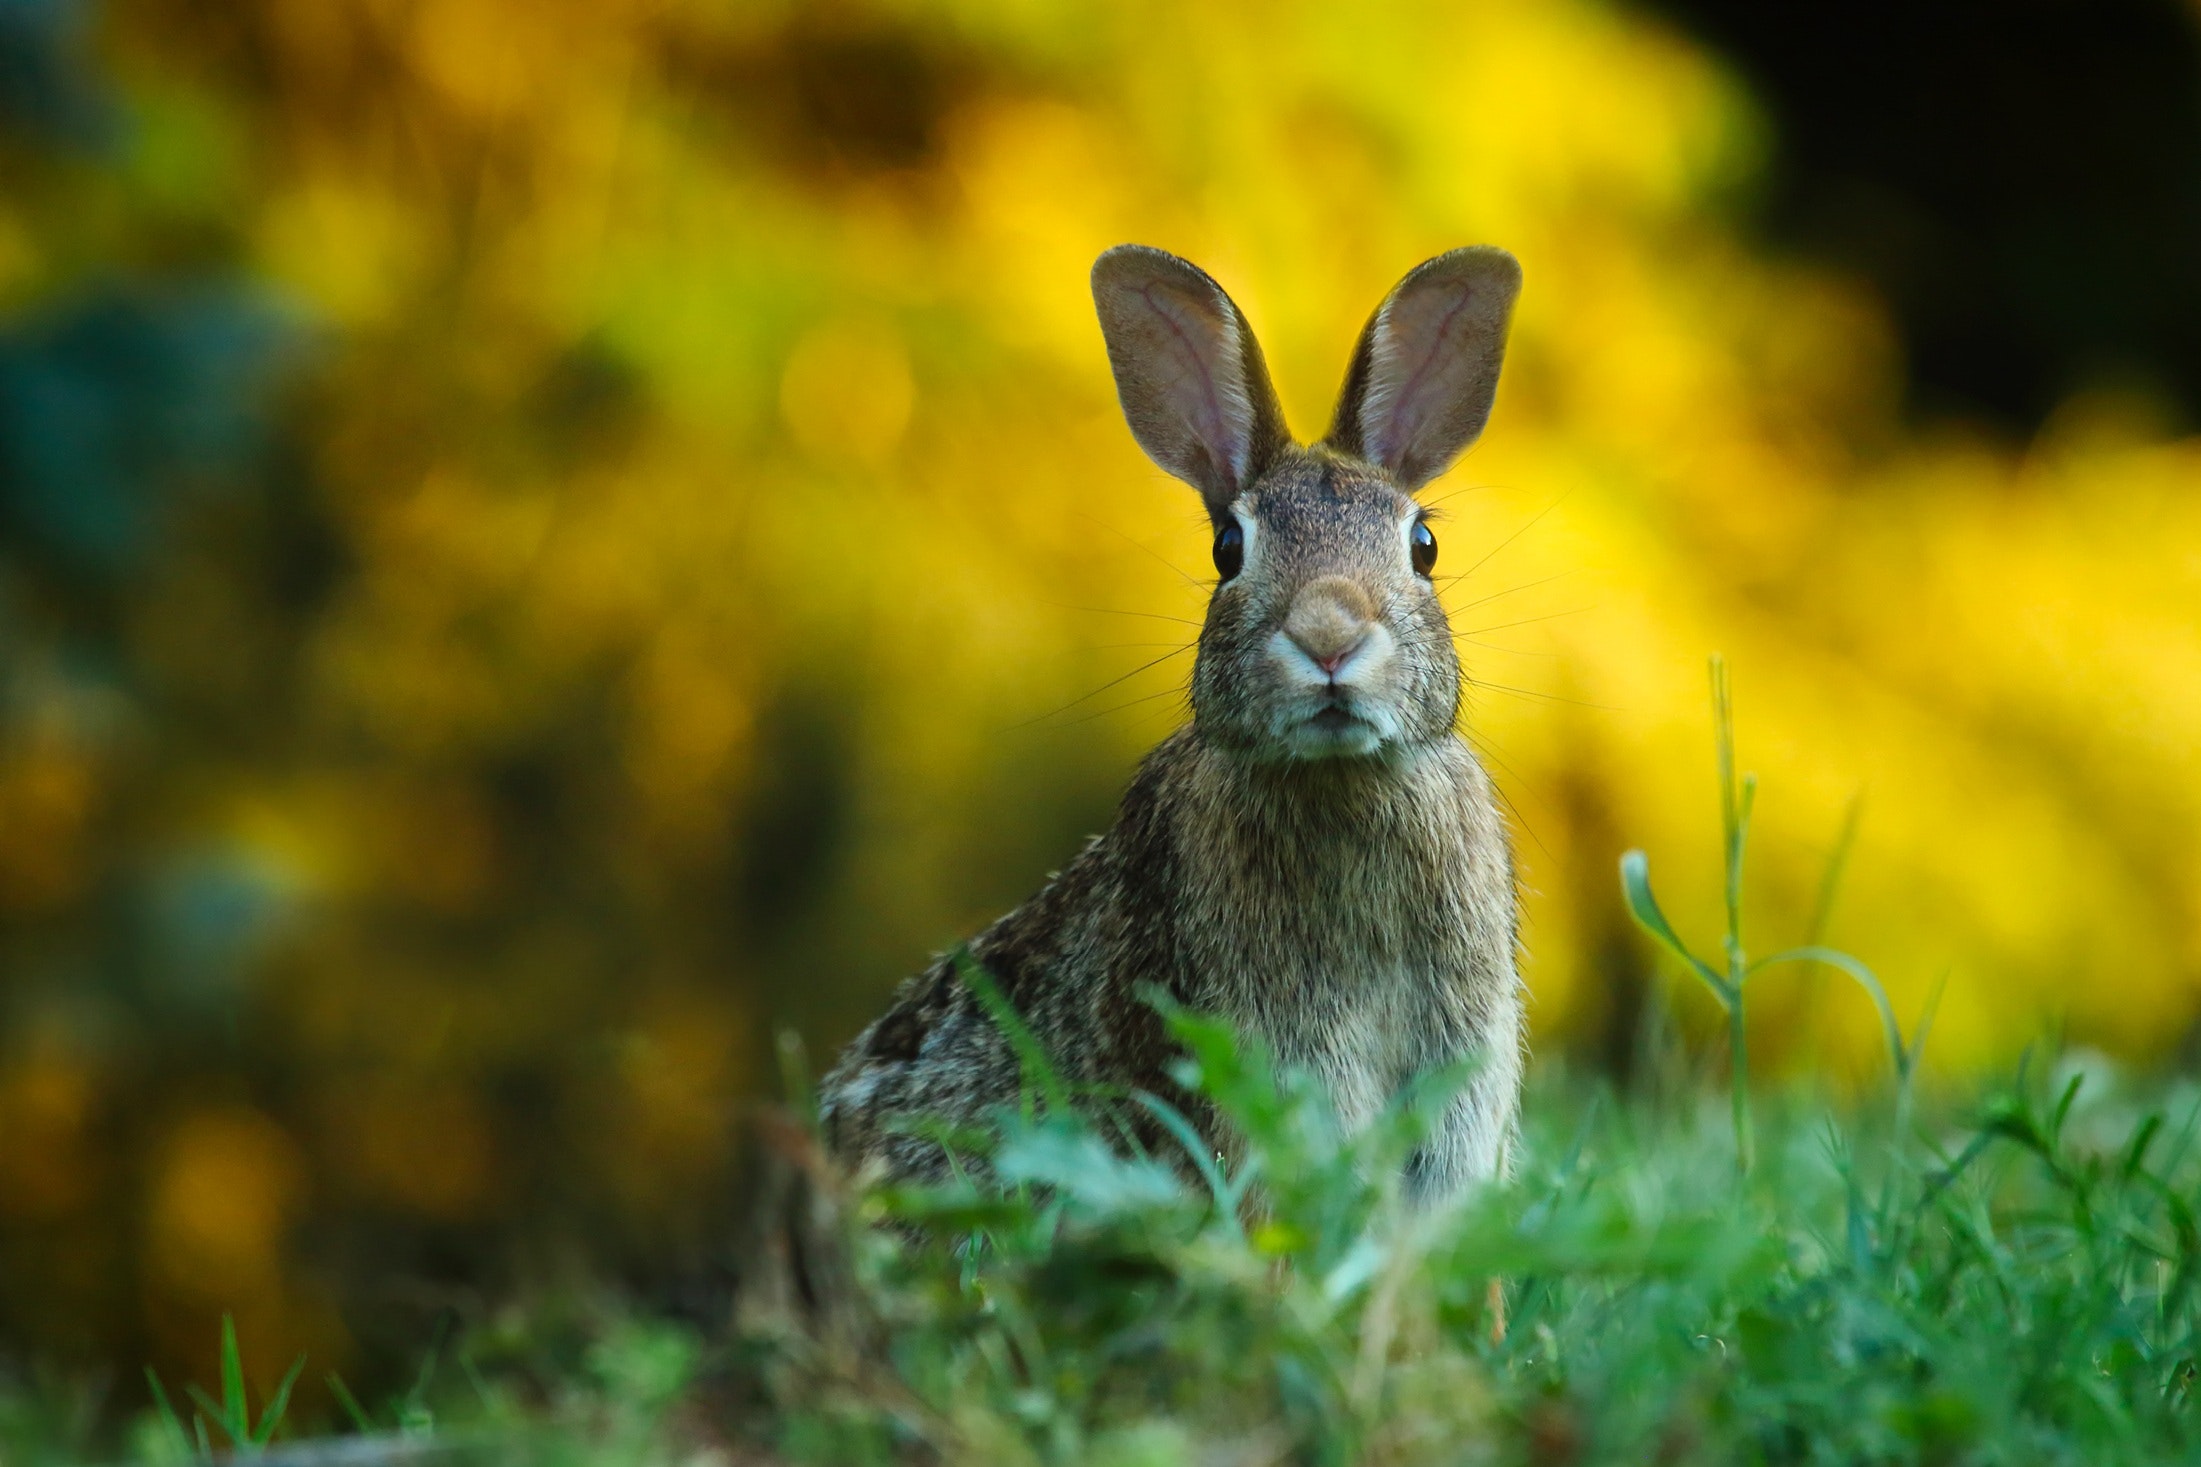 From Iceland - Rabbits in Iceland to deal with their epidemic